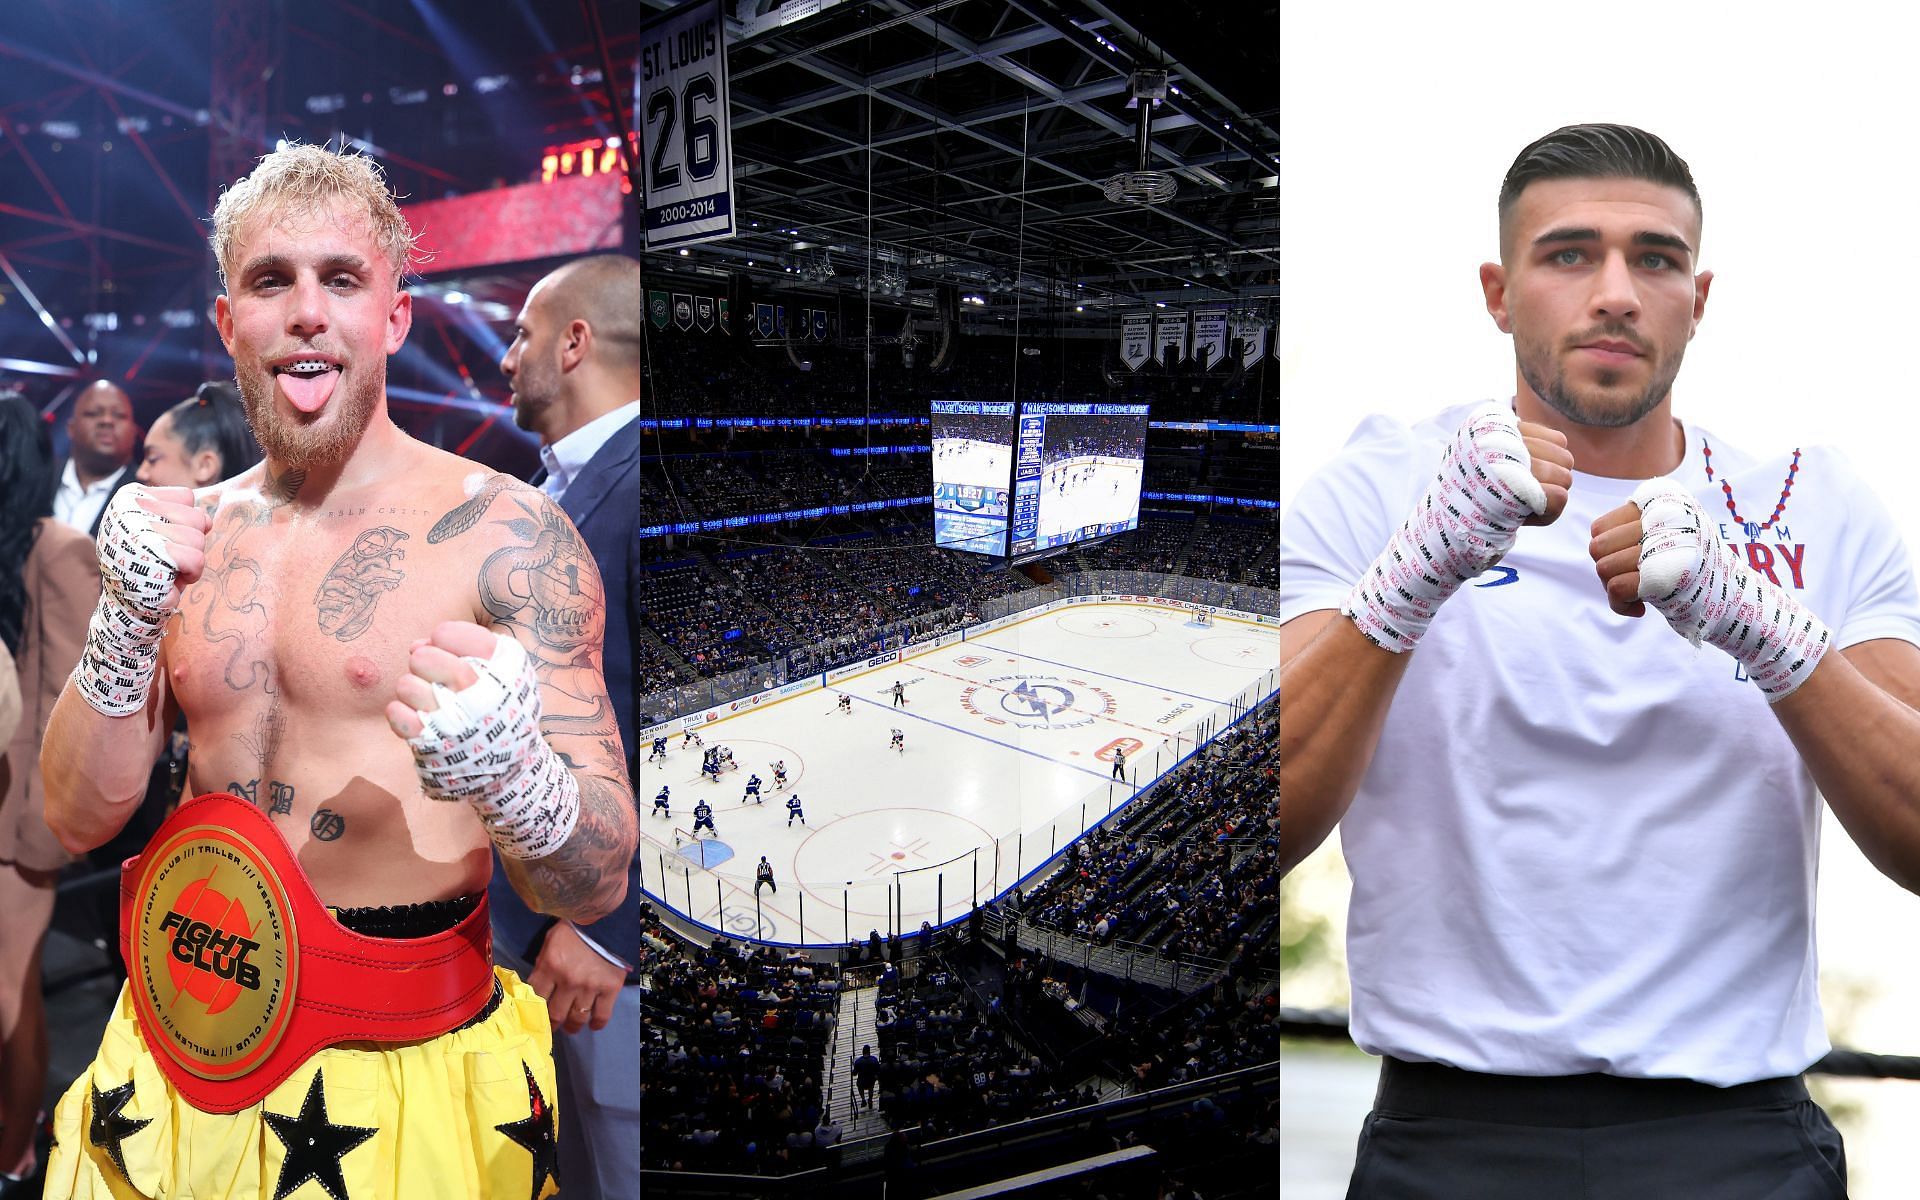 Boxing rivals Jake Paul (left), Tommy Fury (right) and the venue Amalie Arena (center)